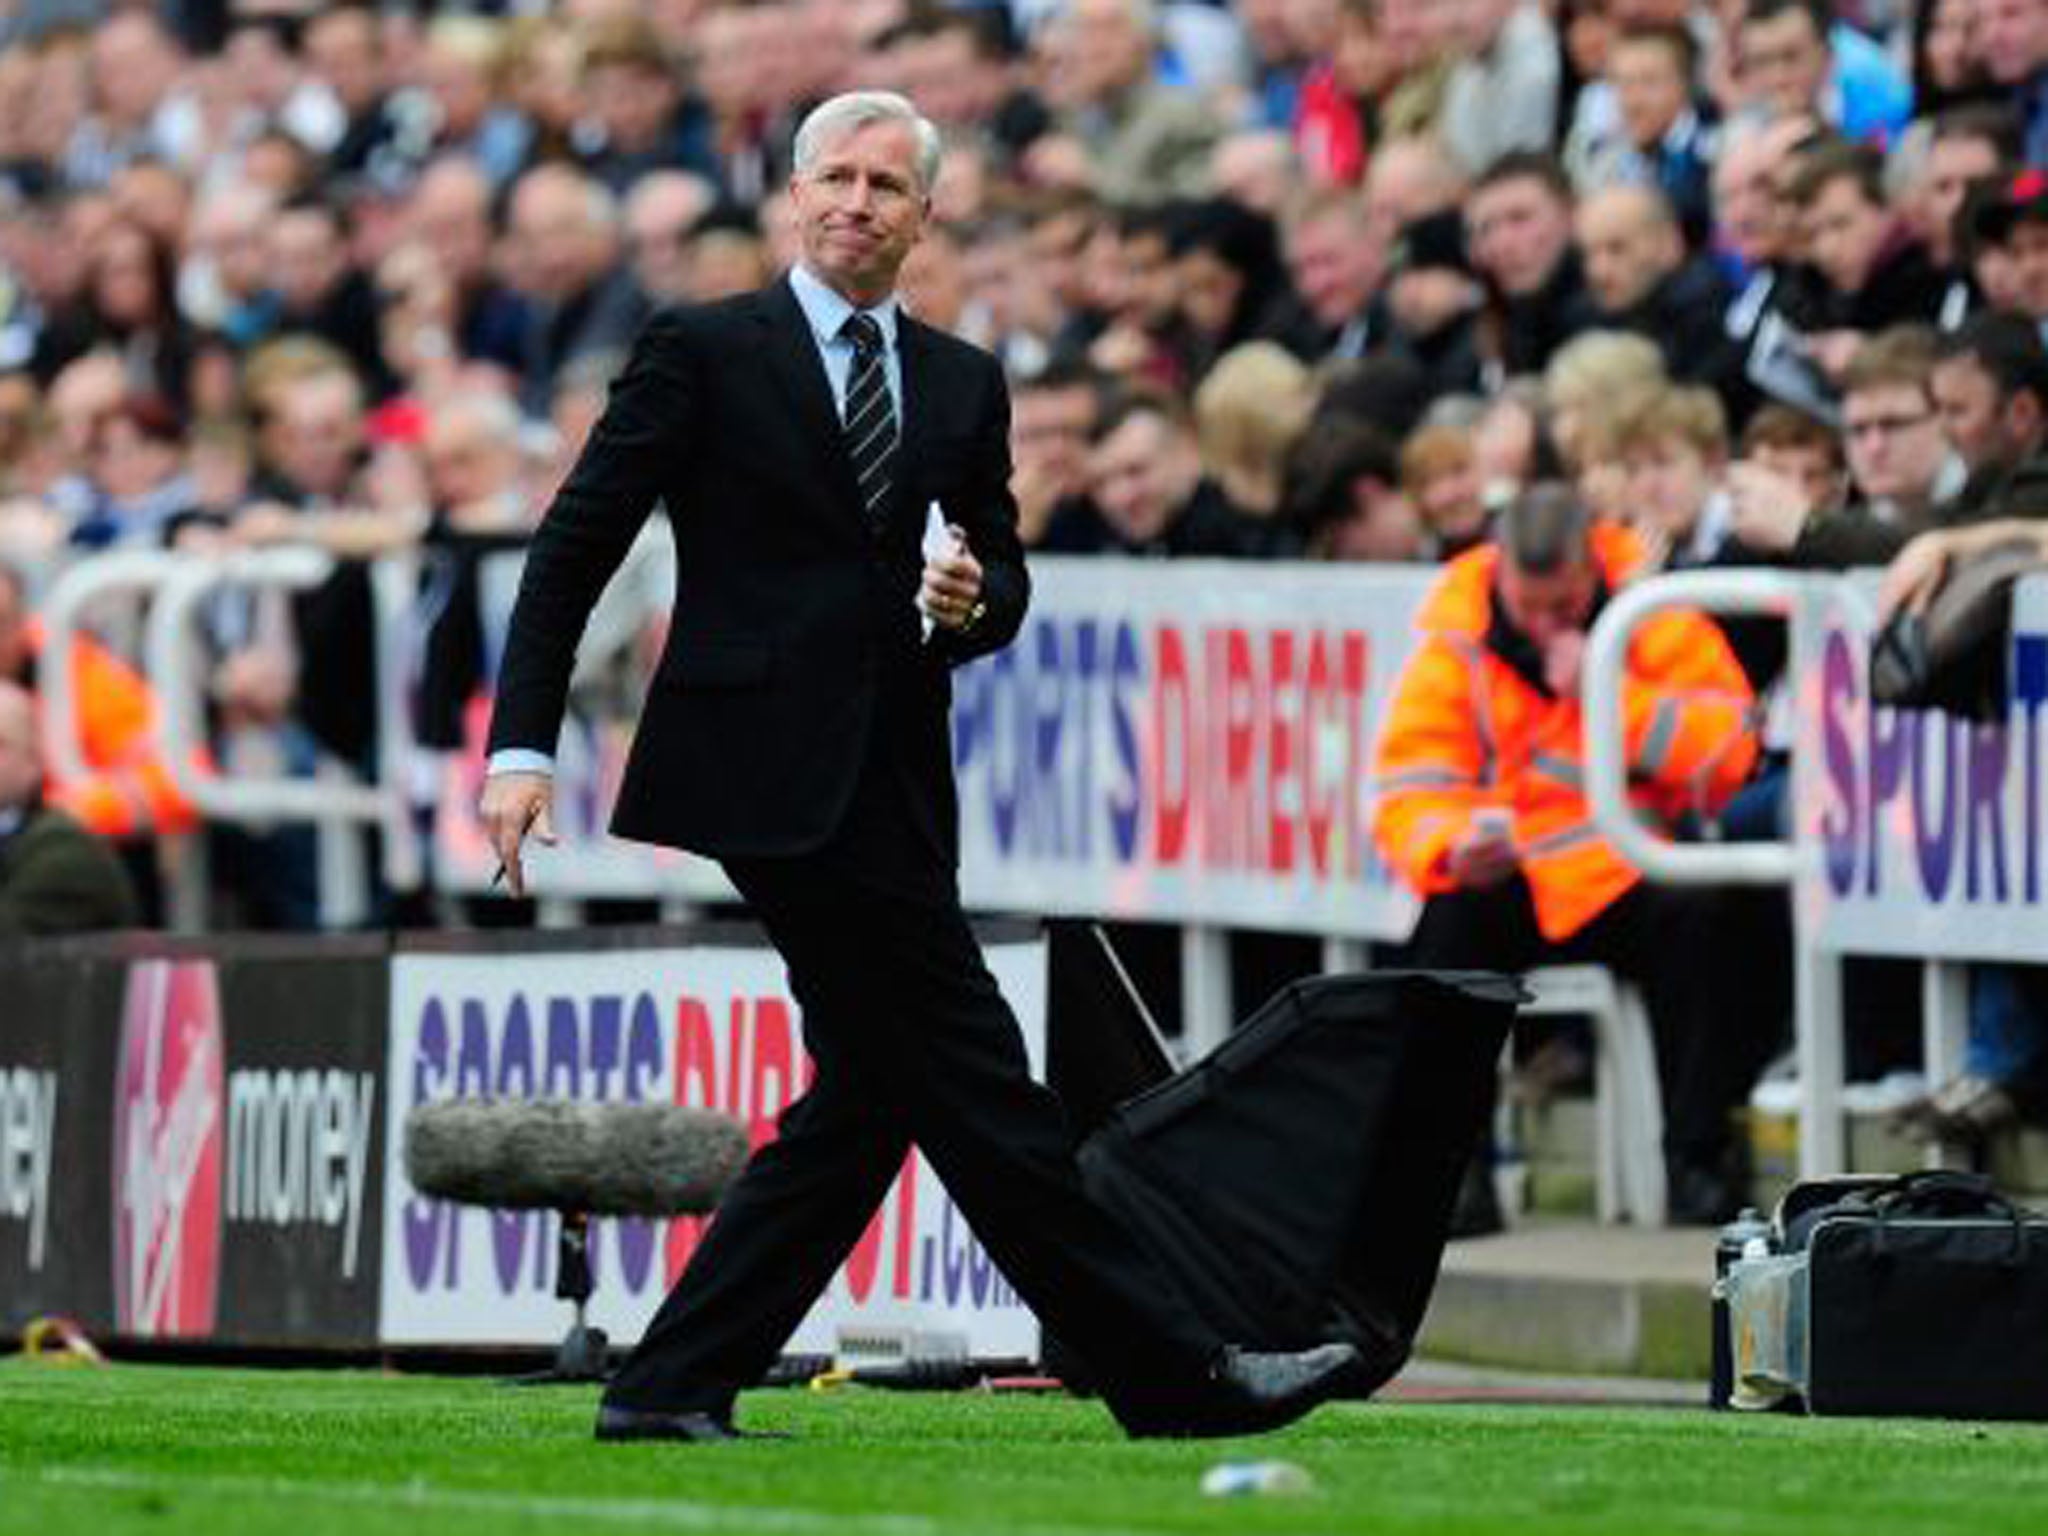 Despite the defeat, and a difficult season, the Newcastle manager Alan Pardew said he was “pretty confident” of still being at the club next season (Stu Forster/Getty Images)